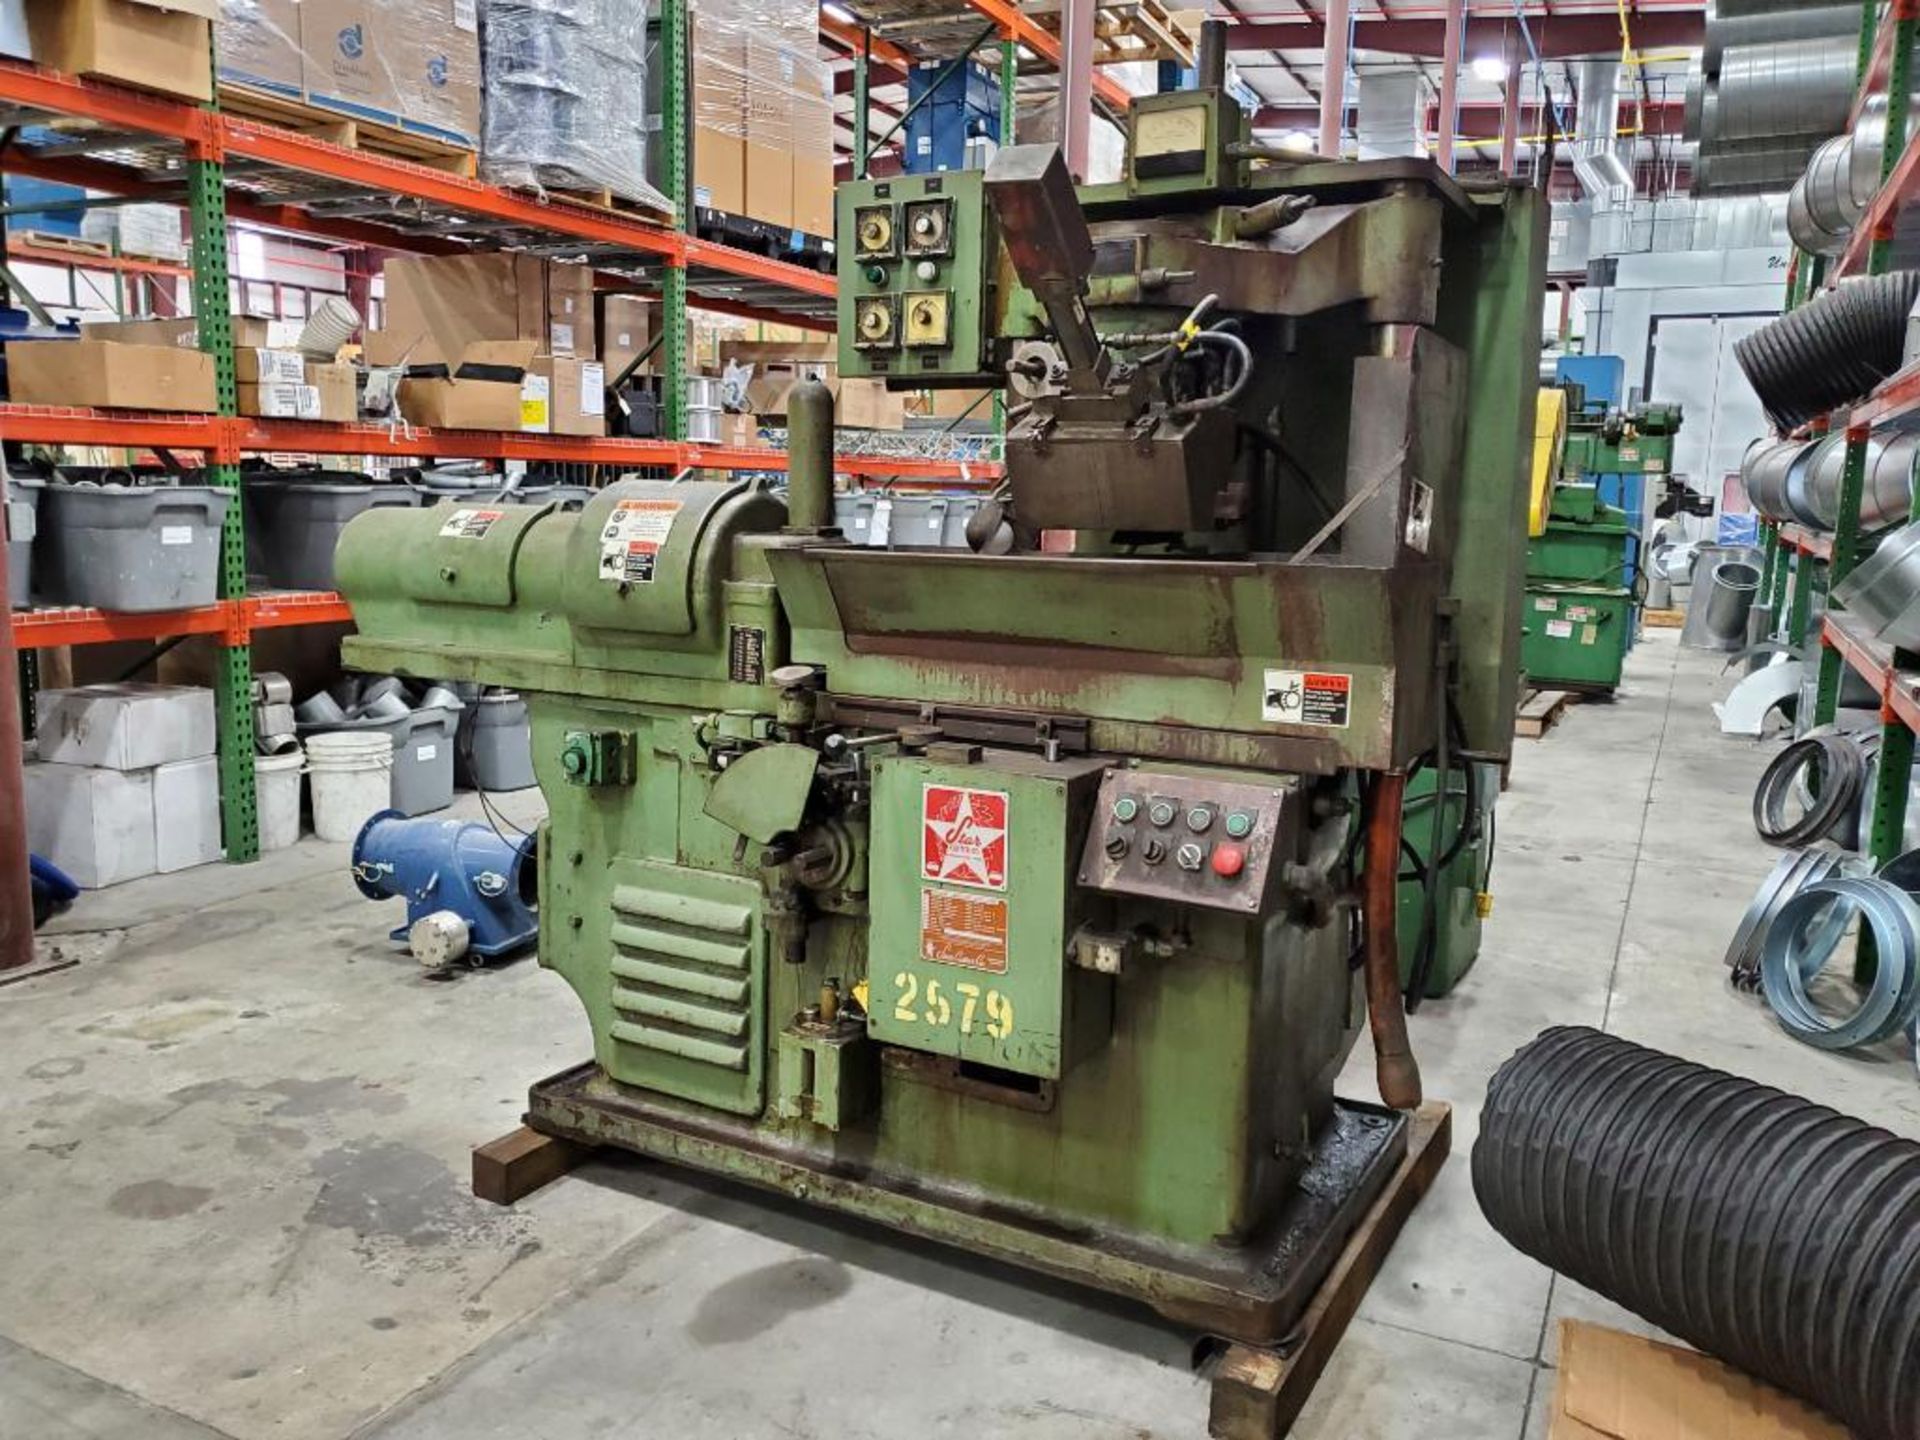 Star-Cutter Hydraulic OD Grinder/Dresser, Model 11X16, S/N B-0002-71, Manual/ Continuous Operation - Image 2 of 11